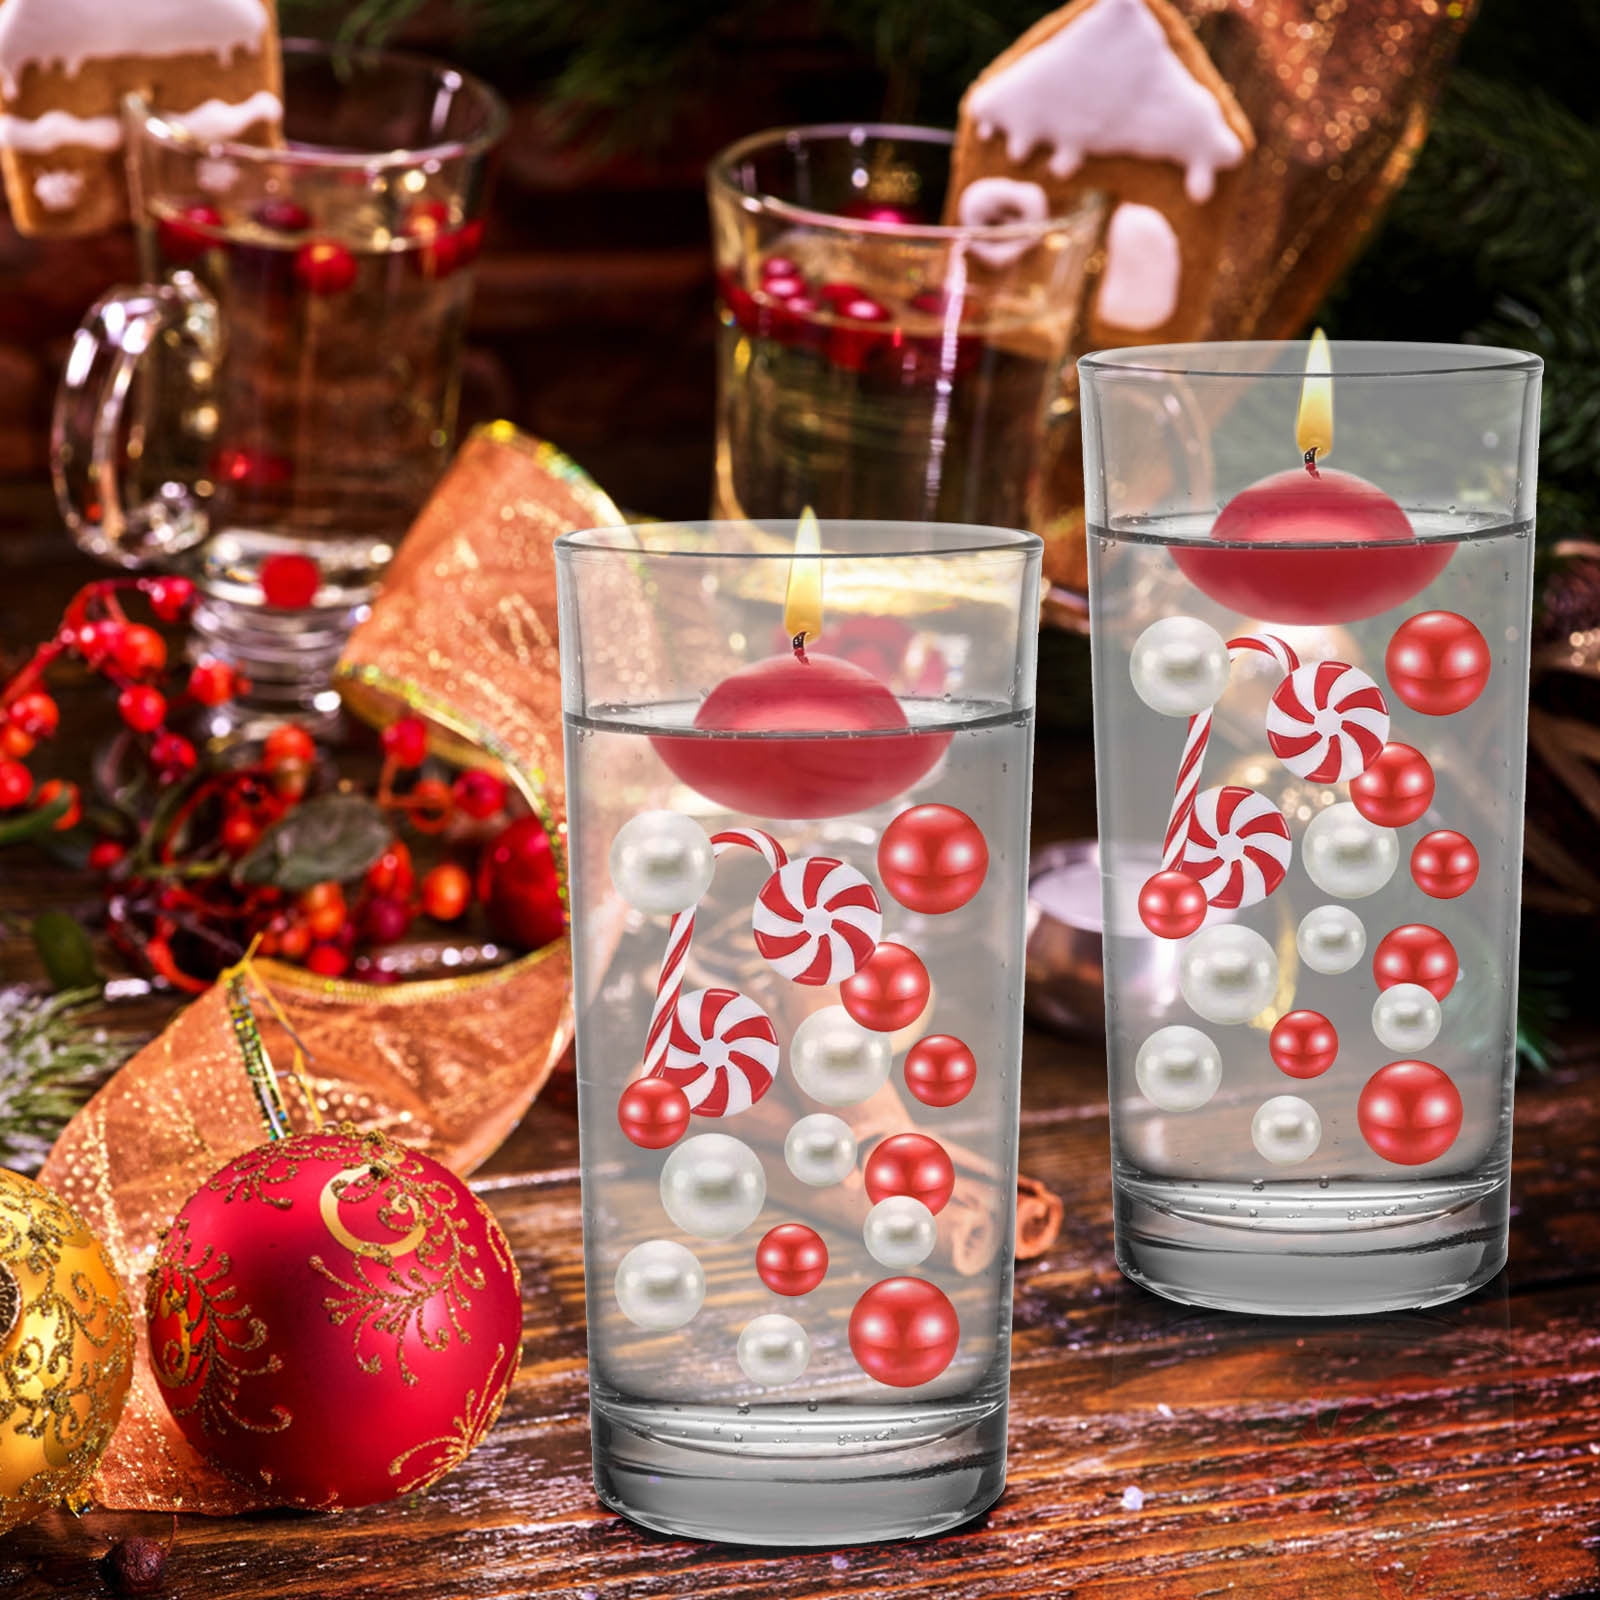 CHGBMOK 6106Pcs Christmas Vase Filler Decor - Acrylic Snowflake Floating  Pearls Clear Water Gel Beads DIY Crafts for Winter Holiday Table  Centerpieces